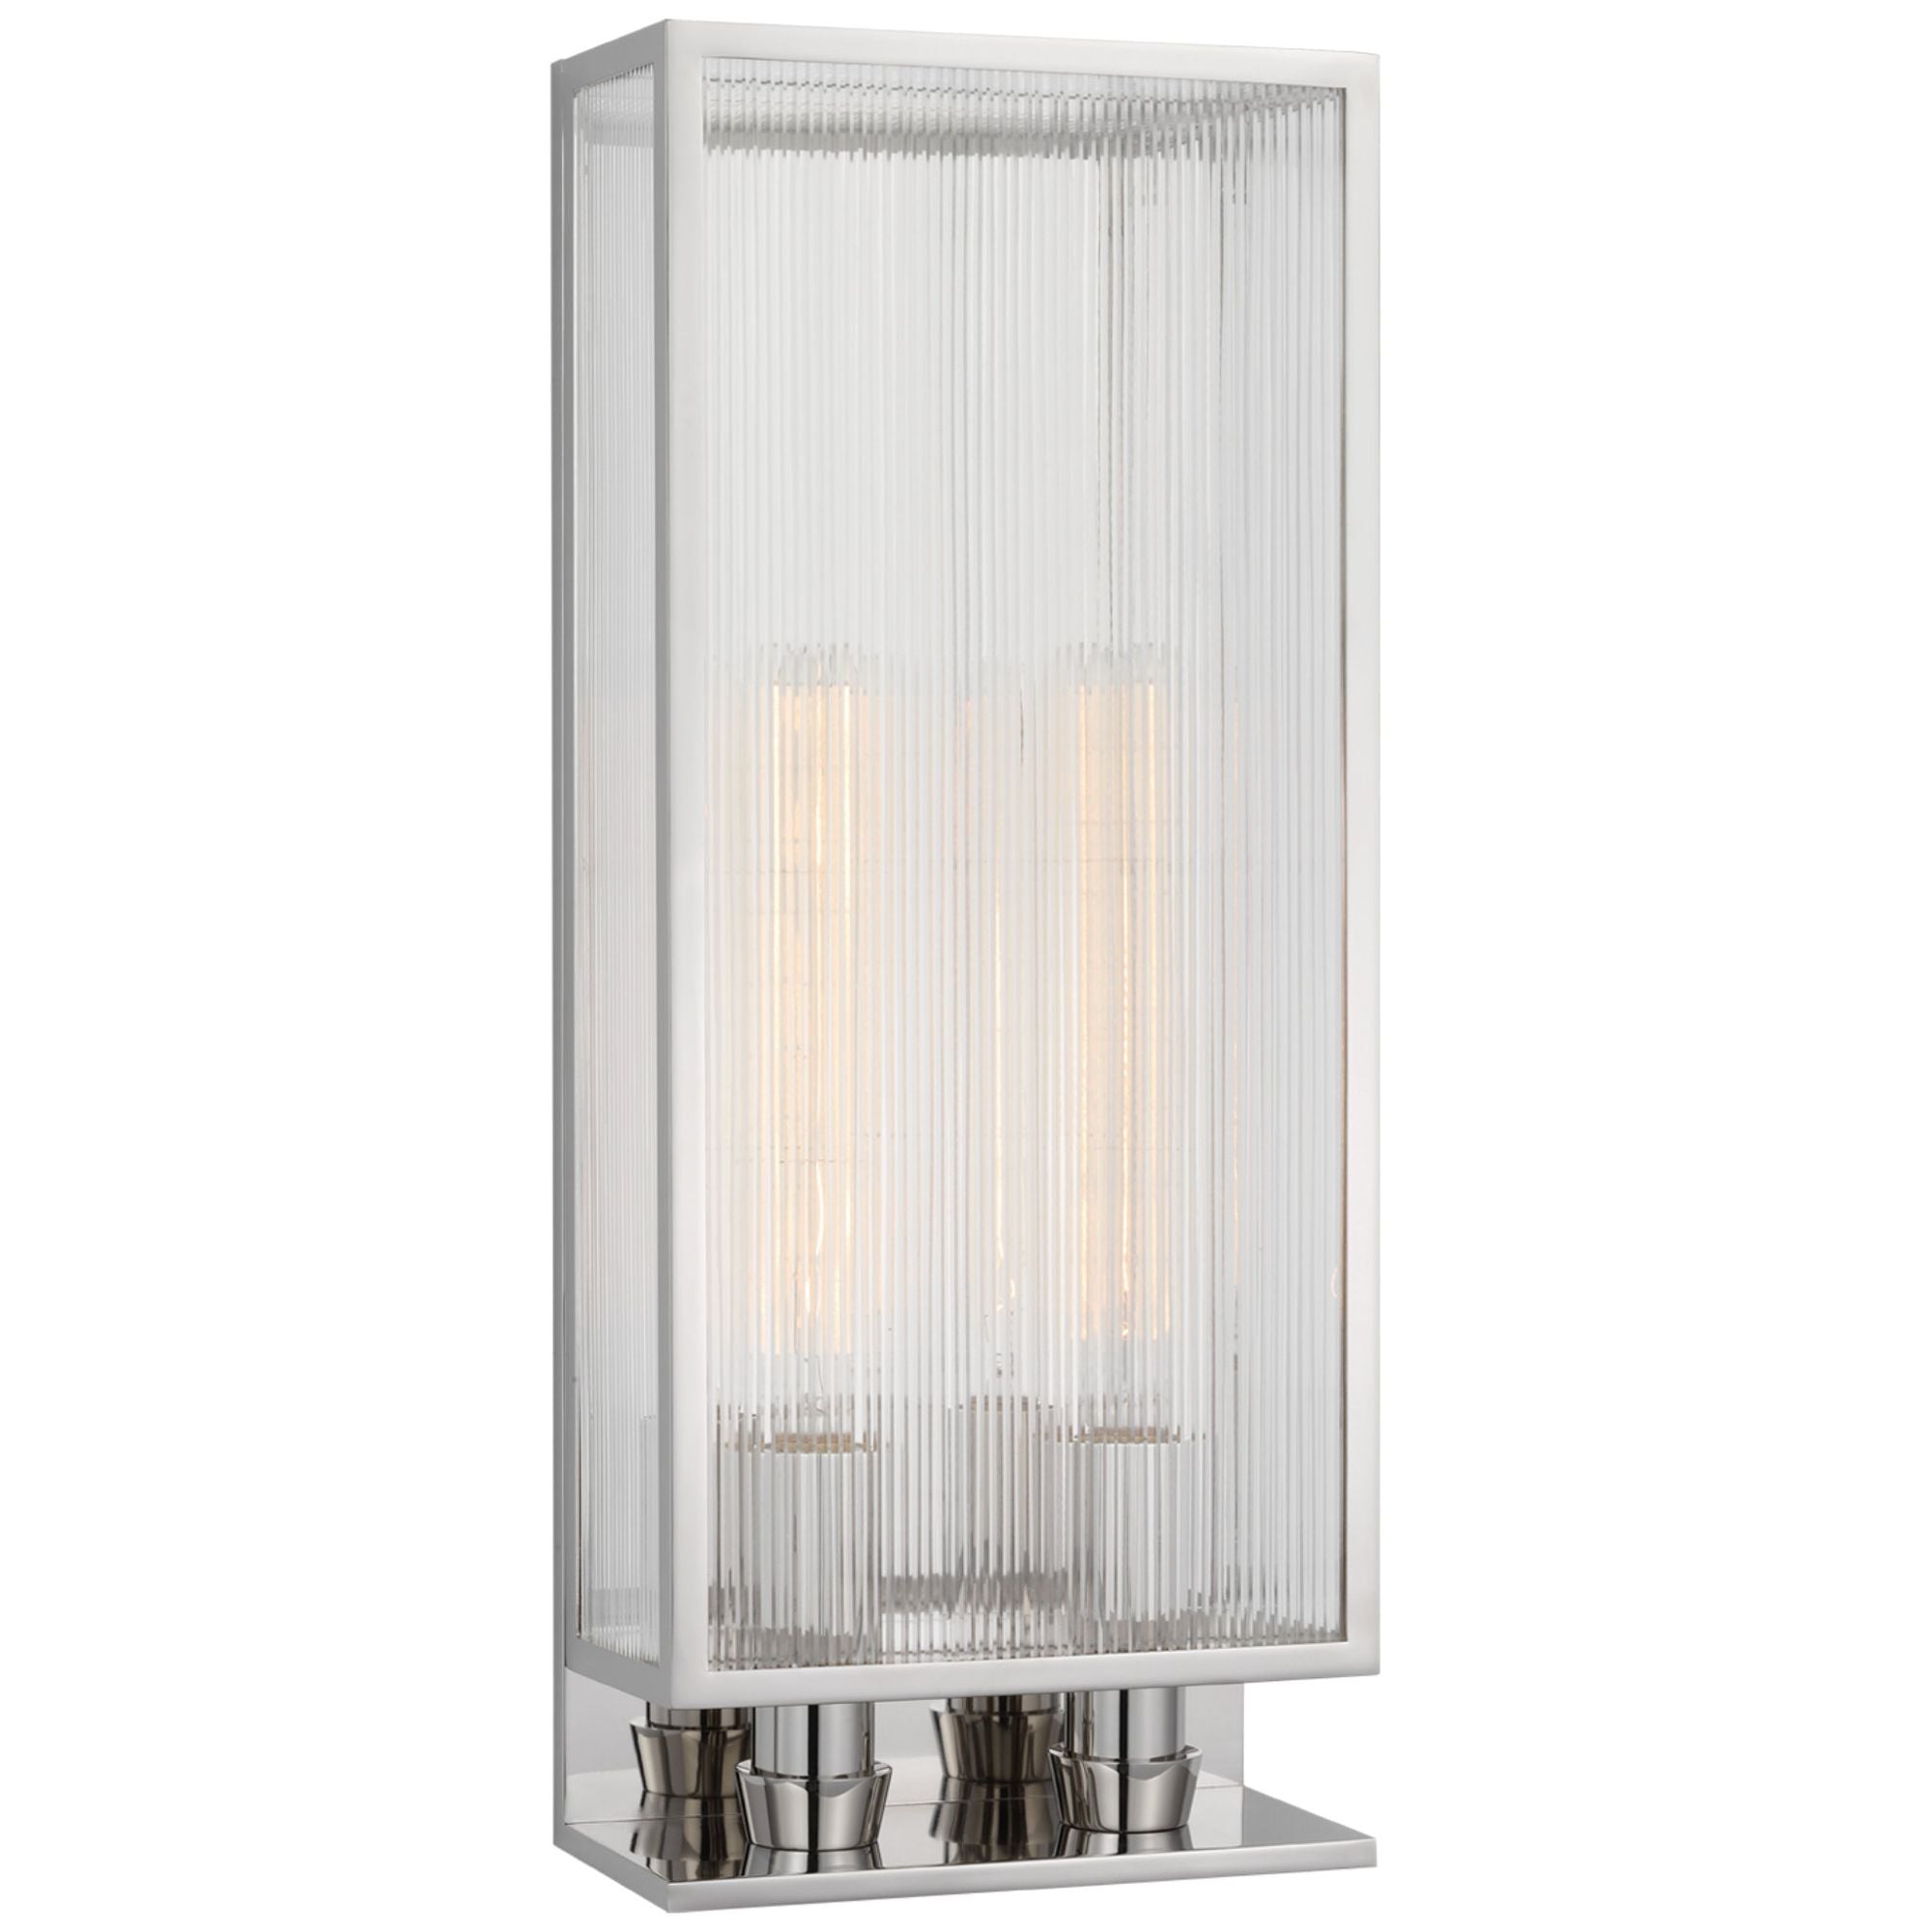 Barbara Barry York 24" Double Box Sconce in Polished Nickel with Clear Ribbed Glass